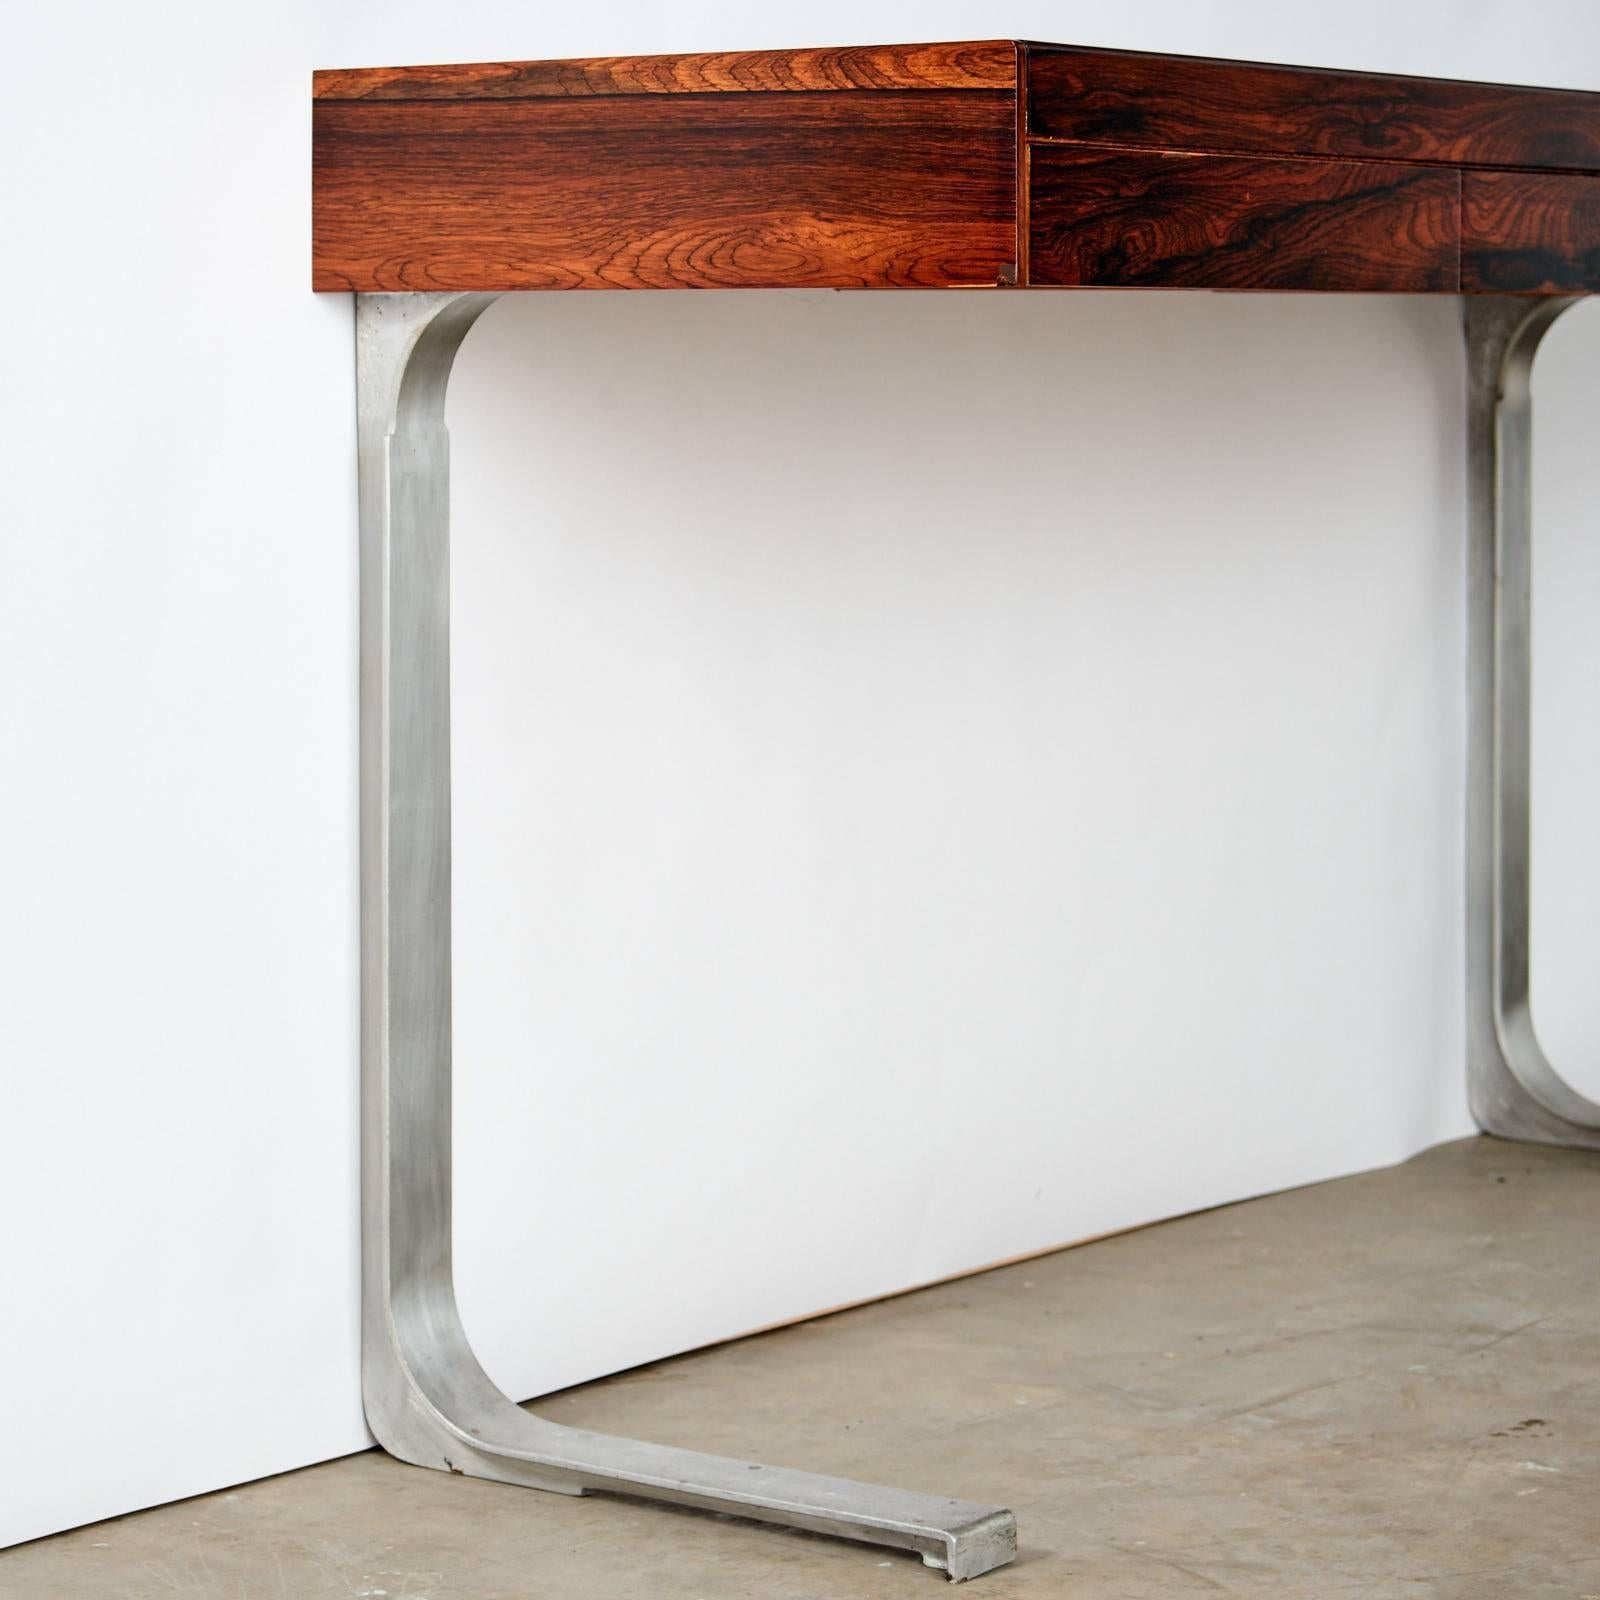 A rosewood console table with three drawers including felt lined cutlery drawer on cast aluminium legs. Designed by Robert Heritage, manufactured by Archie Shine, as part of the 'Planar' series, circa 1967.